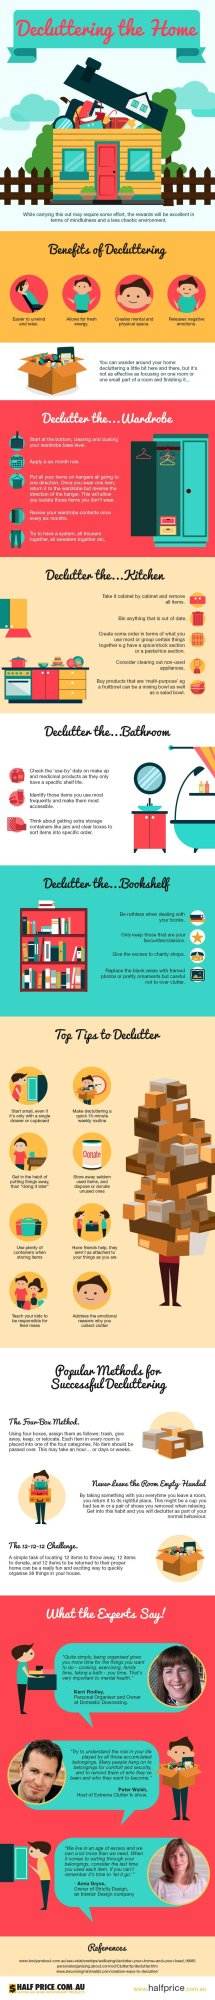 28 Awesome Tips on How To Declutter your Home (Infographic) save energy